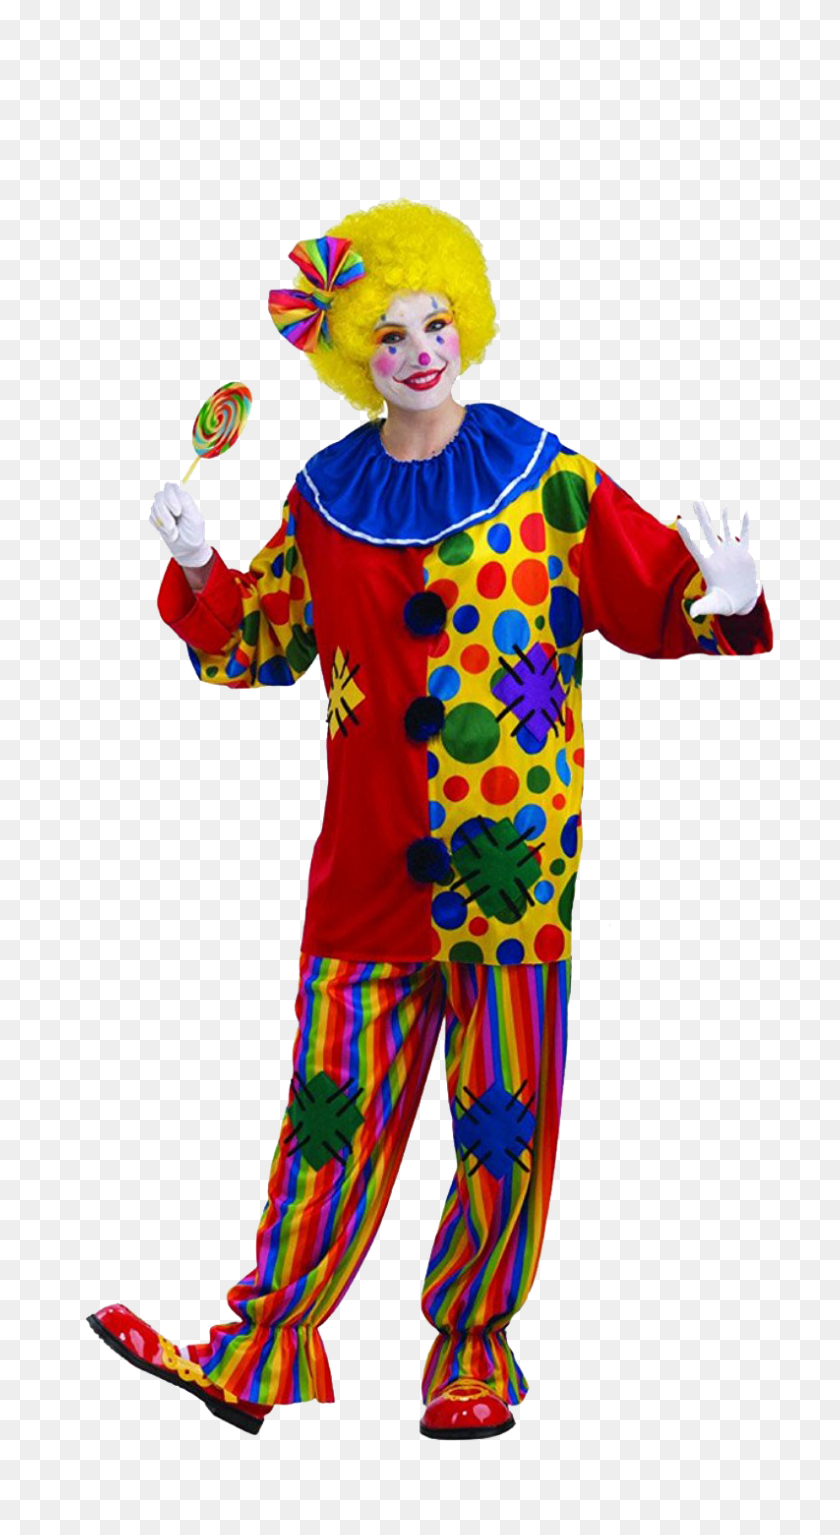 793x1500 Clown Png Background Image - Clown PNG